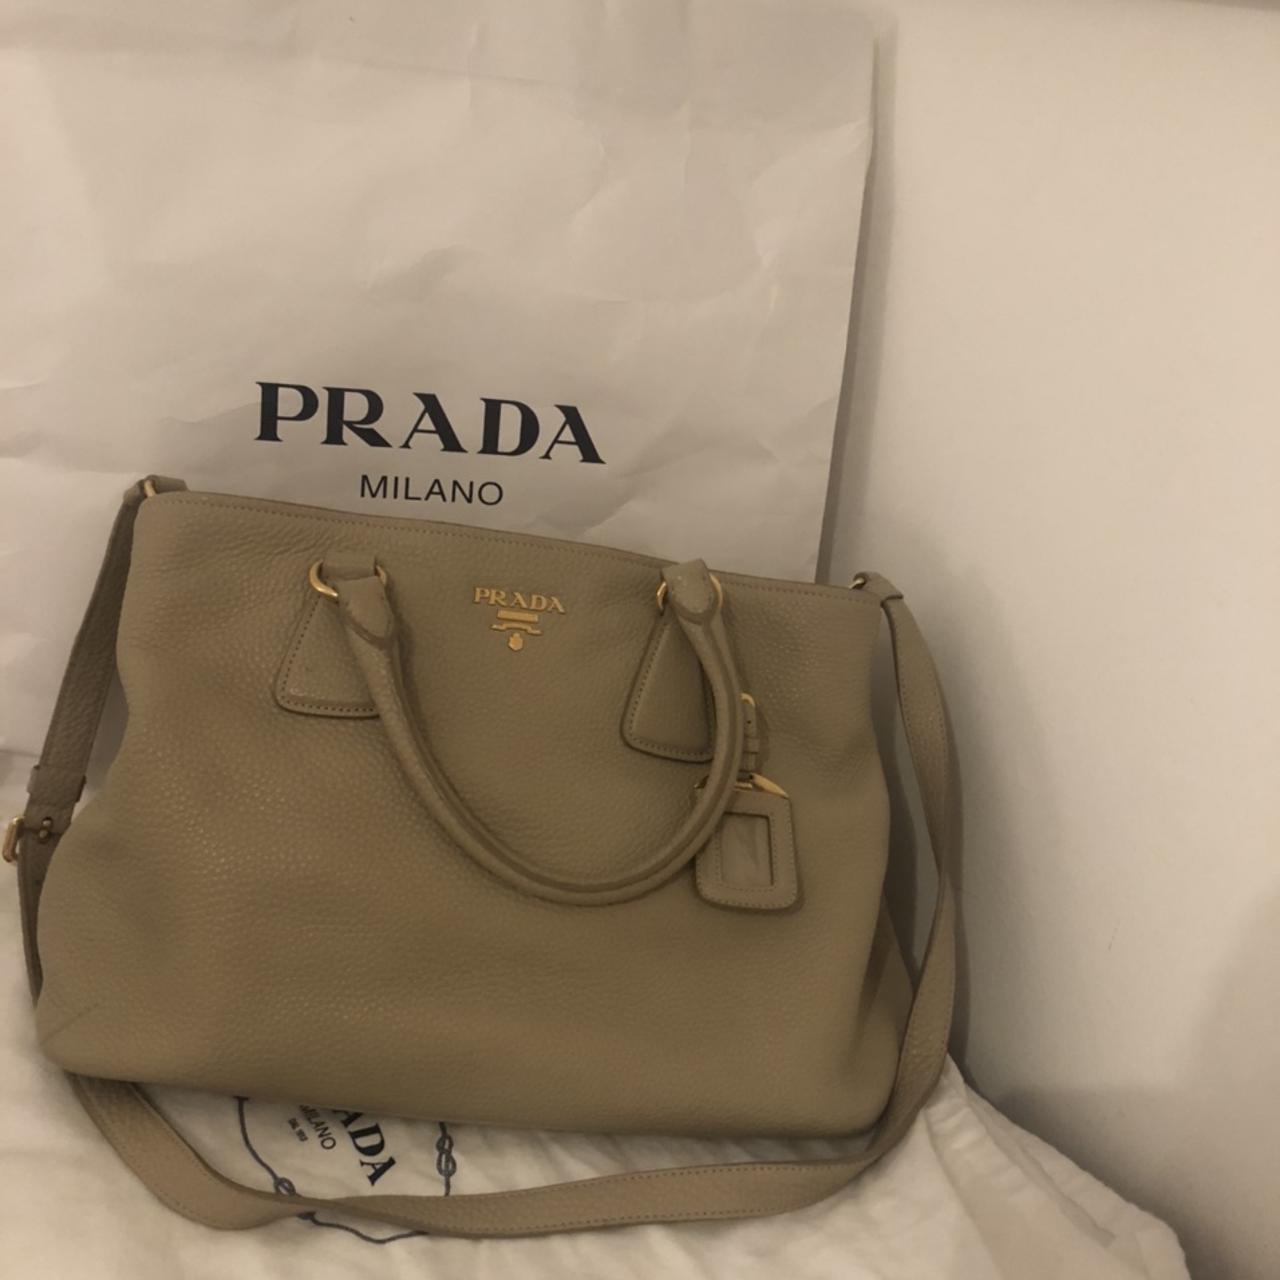 Is a second hand Prada bag in good condition worth the cost for someone who  intends to actually use it and not store it? - Quora